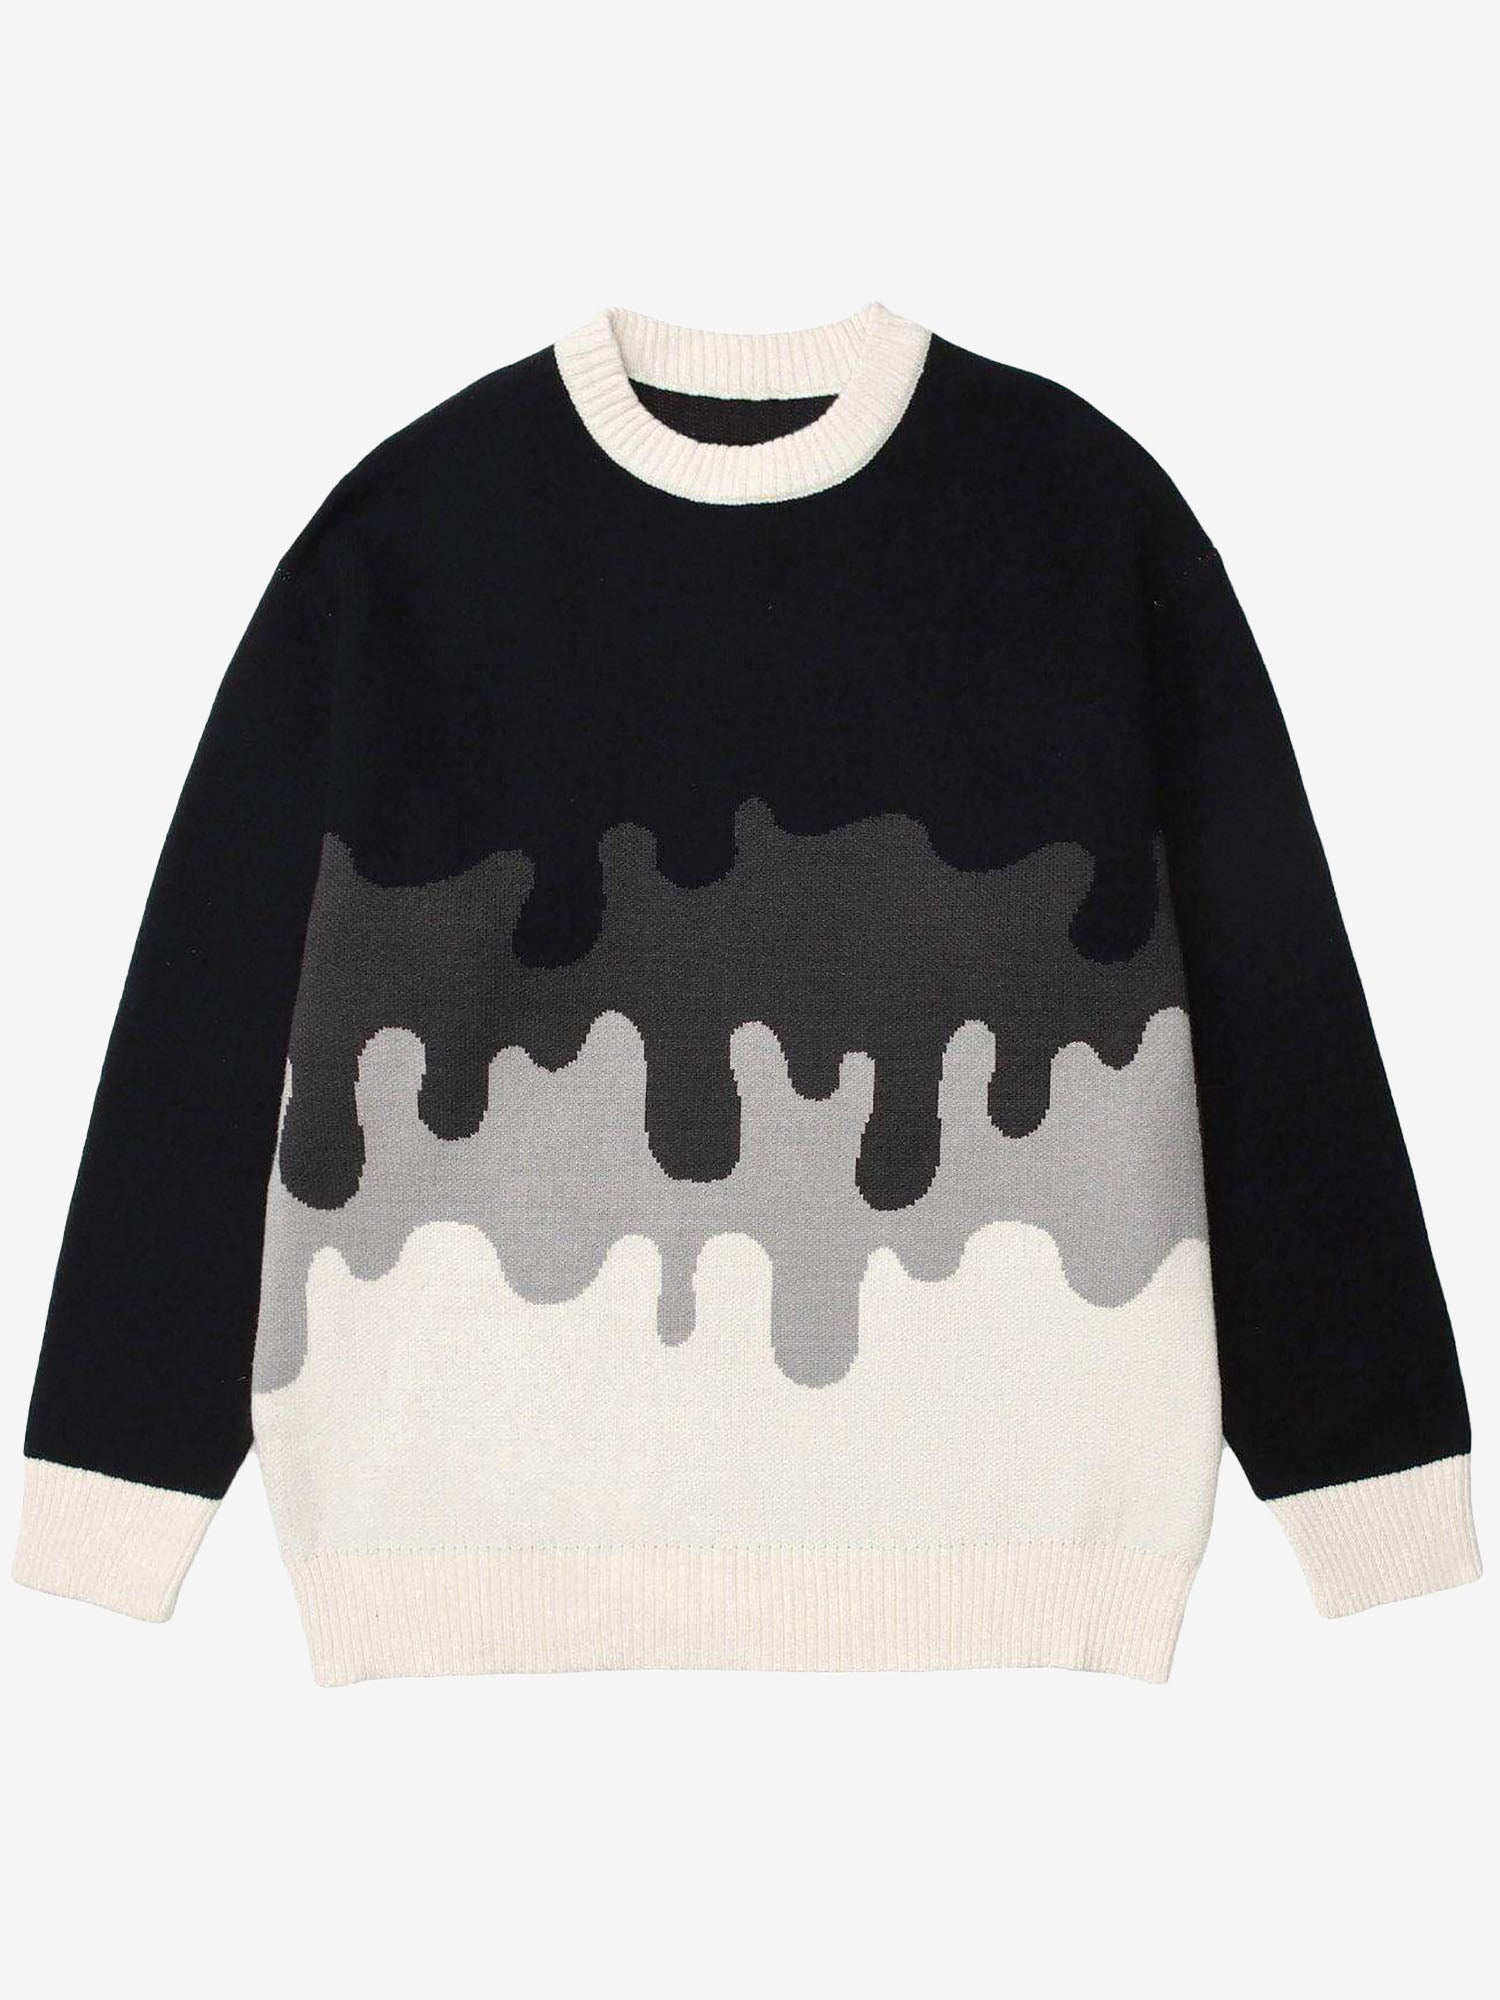 JUSTNOTAG Gradient Pattern Knitted Sweater